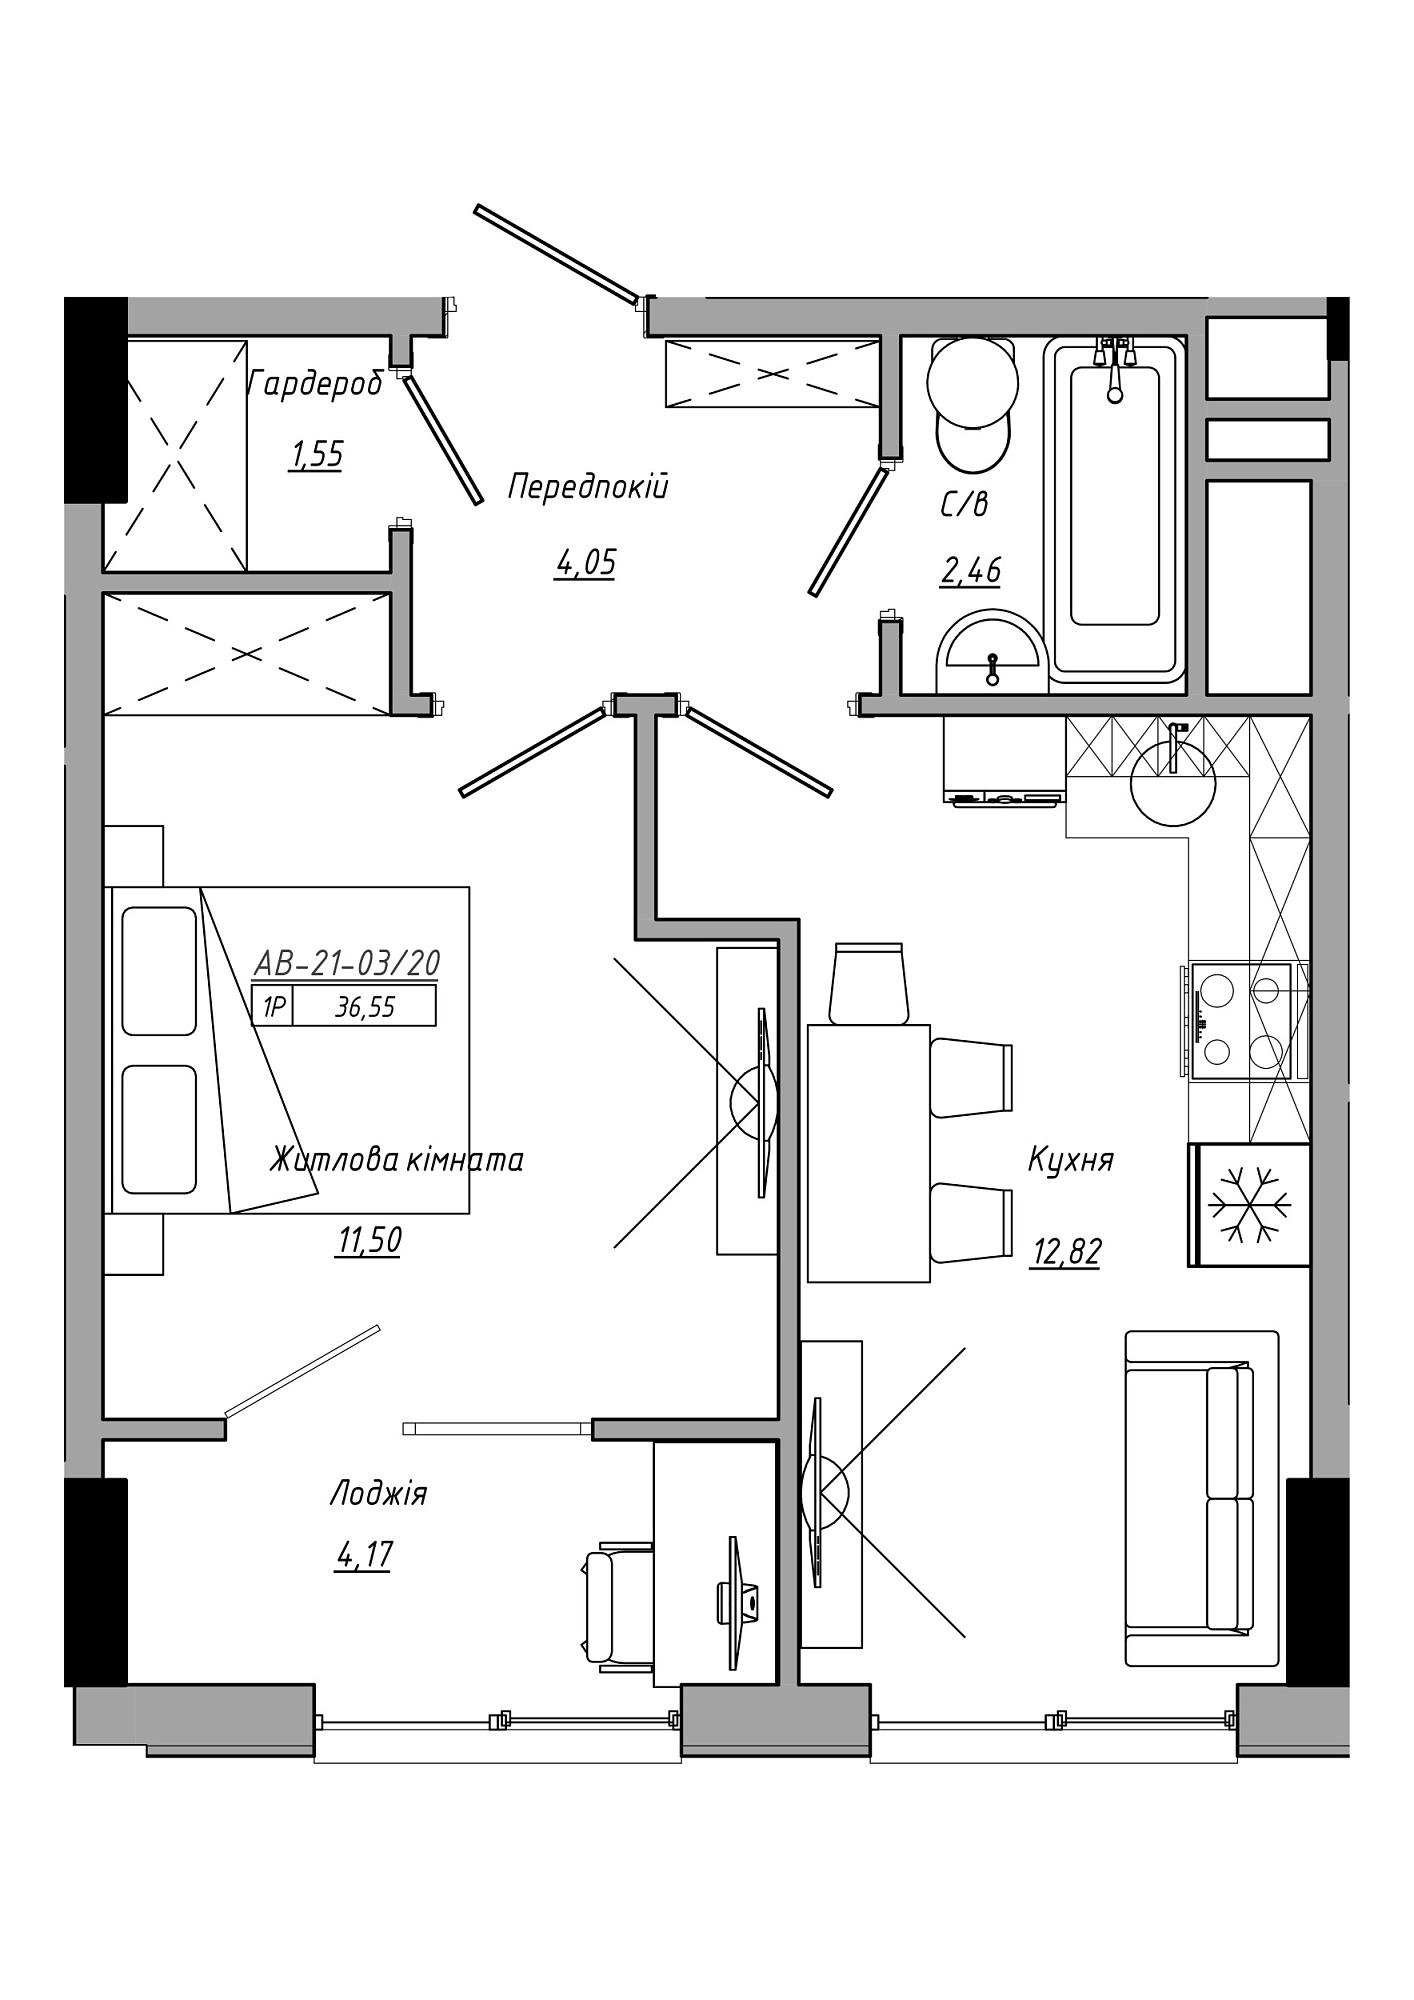 Planning 1-rm flats area 36.55m2, AB-21-03/00020.